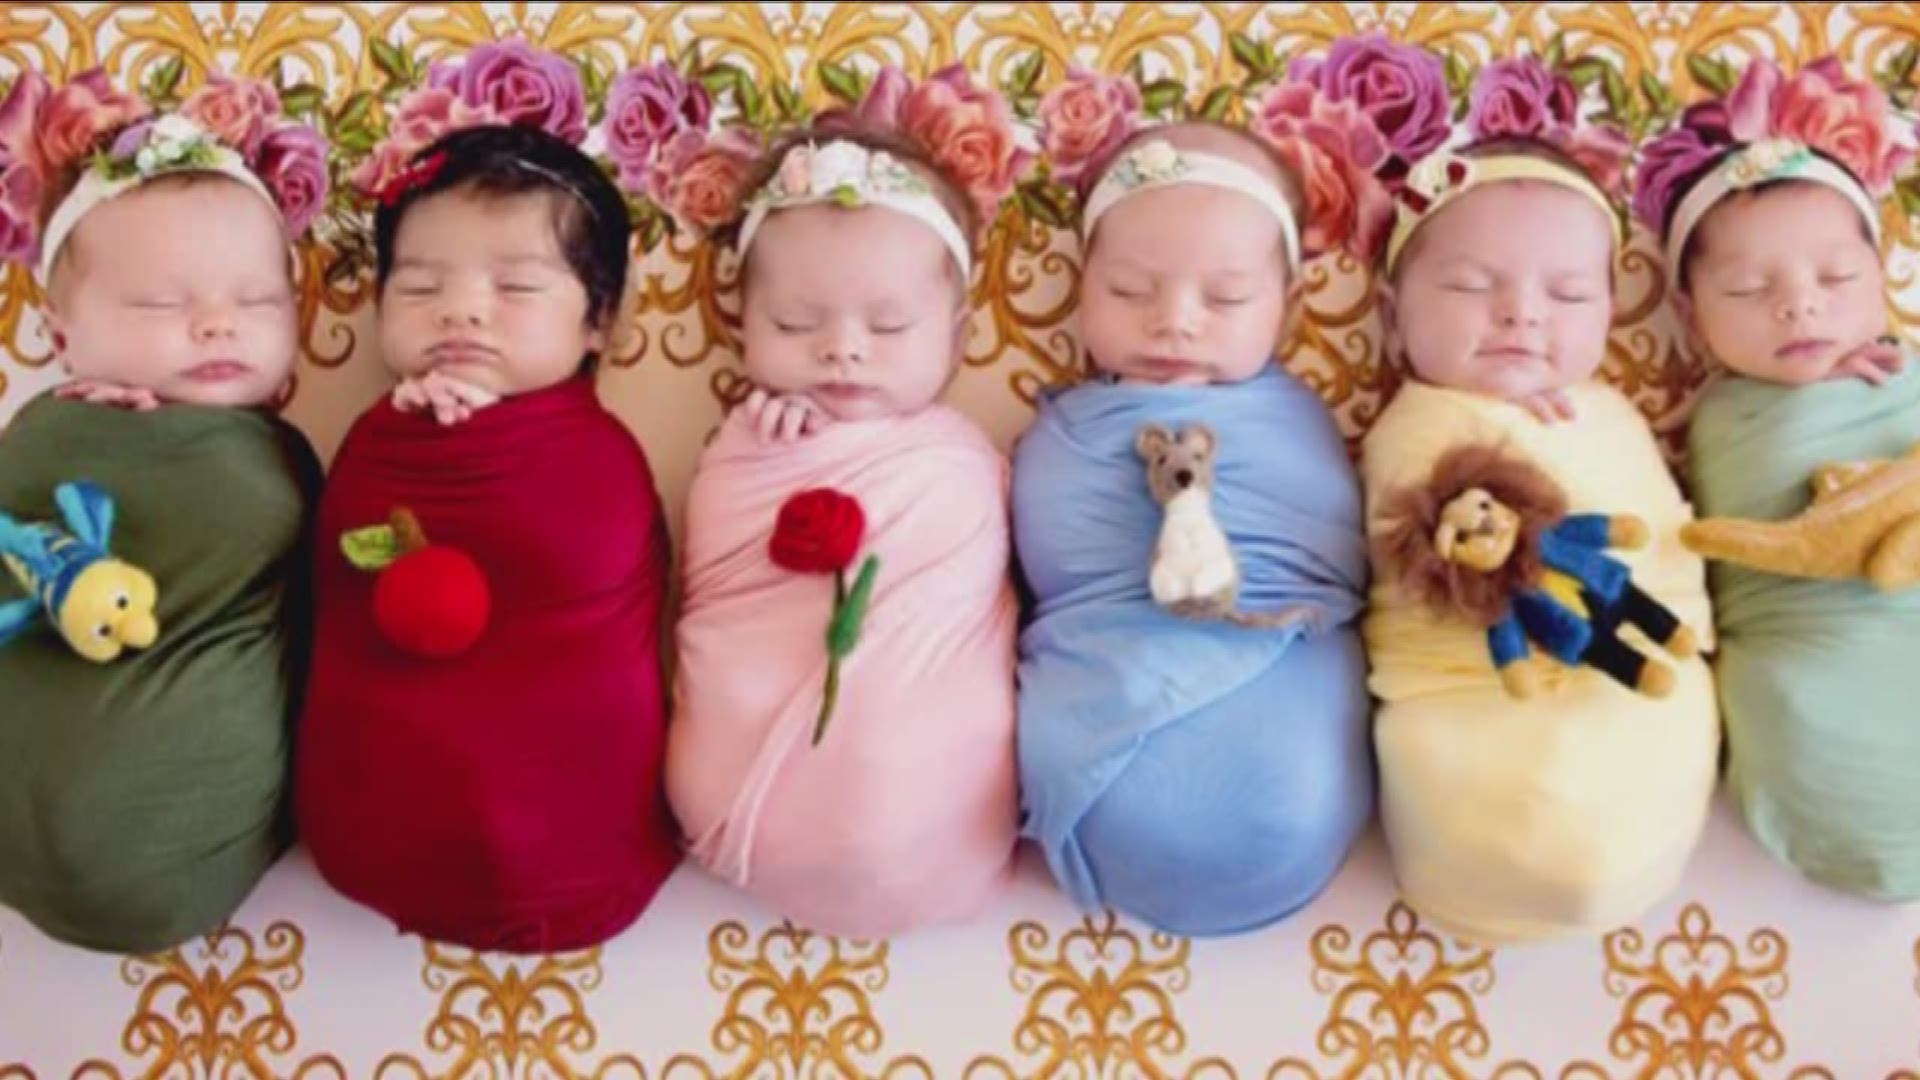 Belly Beautiful Portraits in Roseville is now getting international attention after almost 16 million people around the world have viewed newborns dressed as Disney princesses. (August 2, 2017)